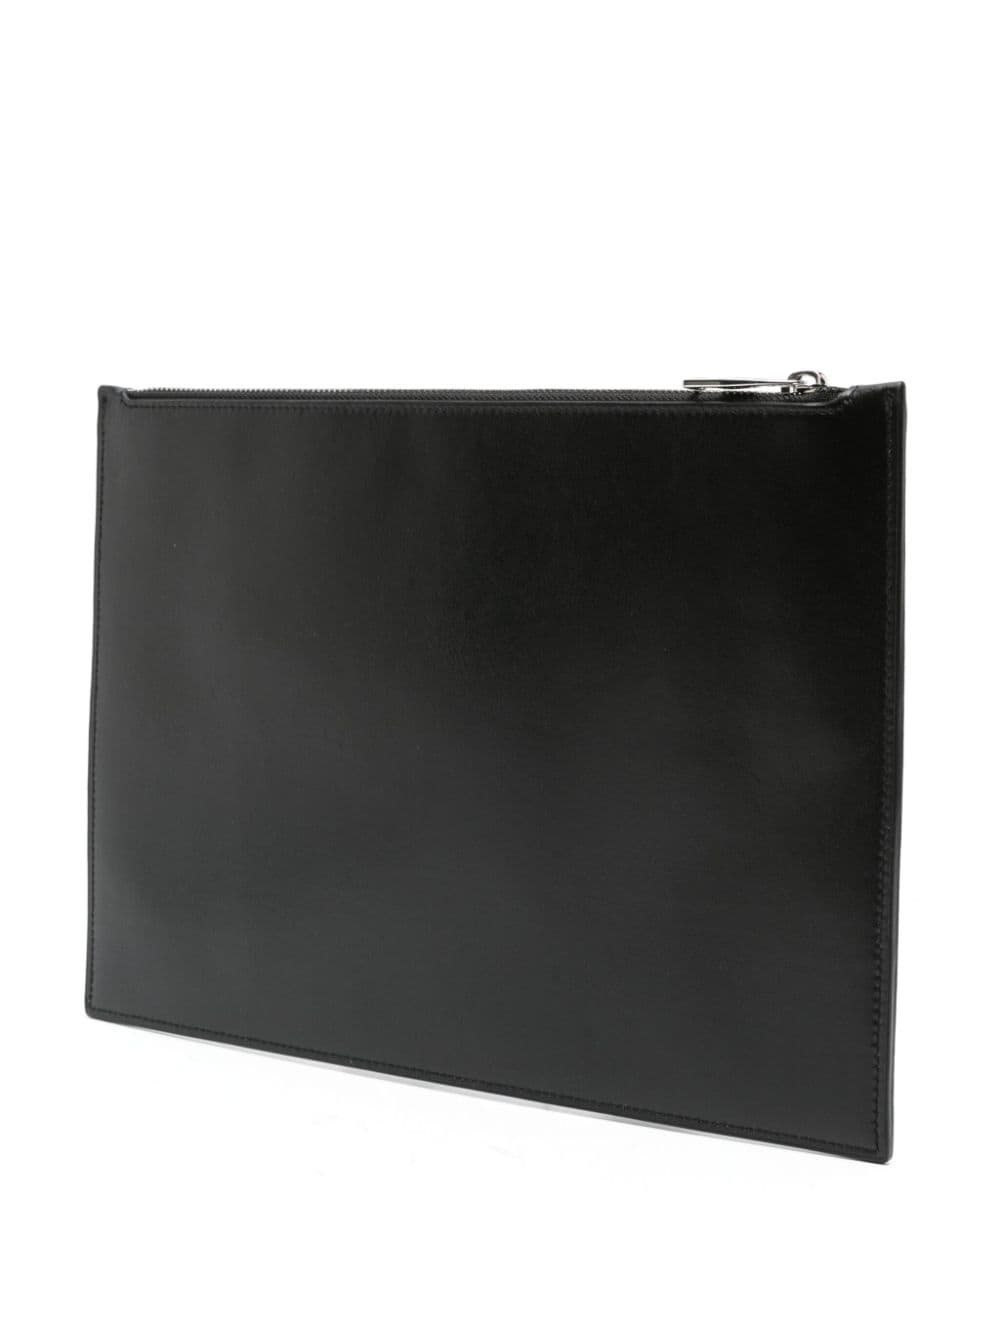 studed leather clutch bag - 3